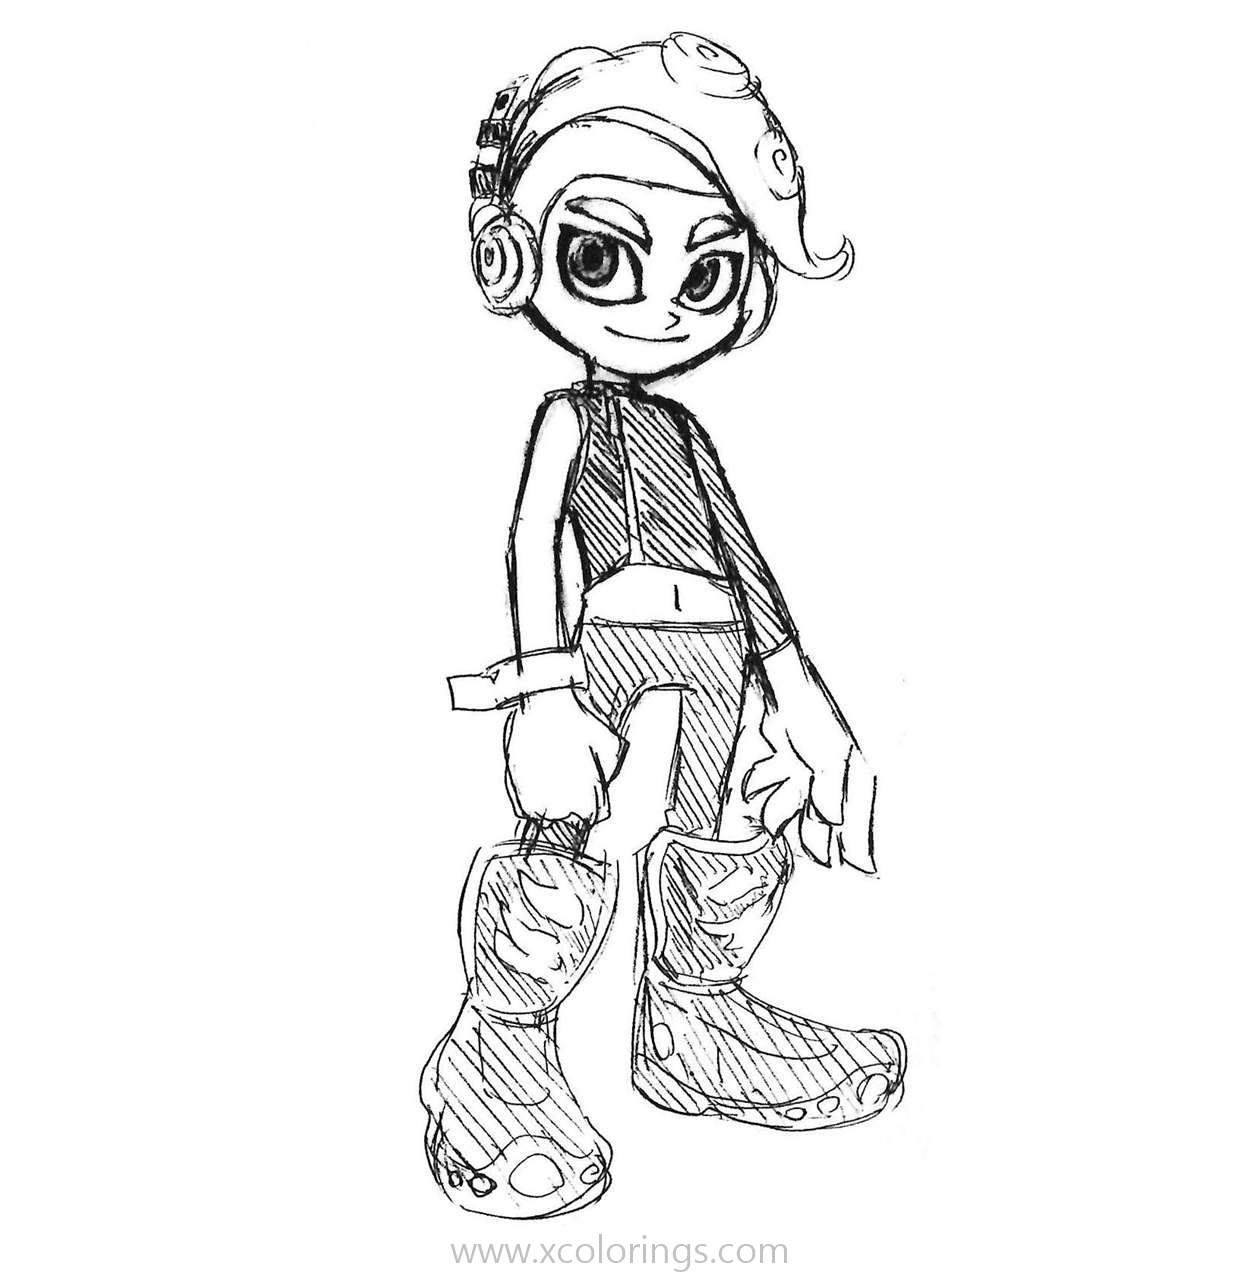 Free Splatoon Coloring Pages Agent 8 printable